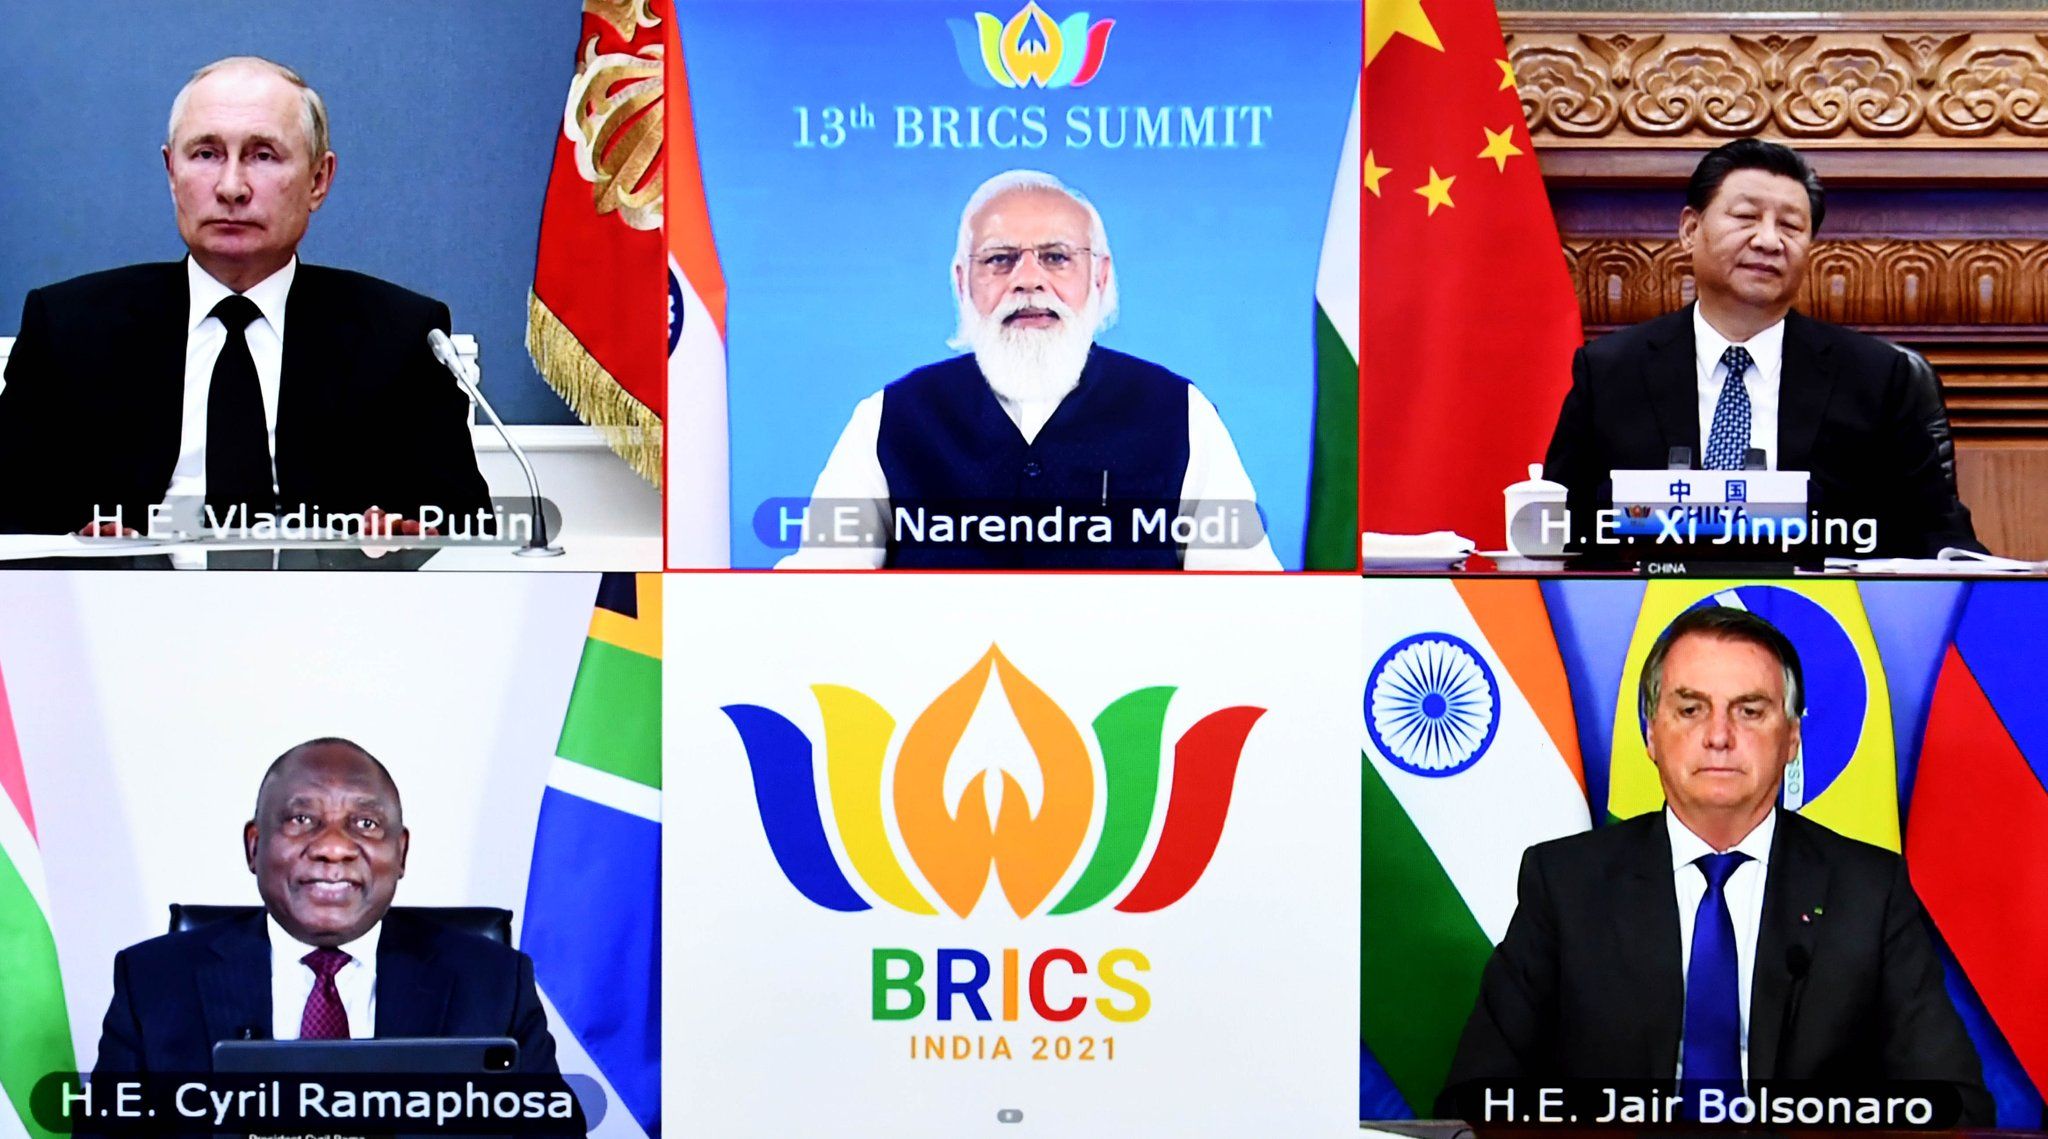 BRICS Summit 2021: Who said what at the diplomatic event